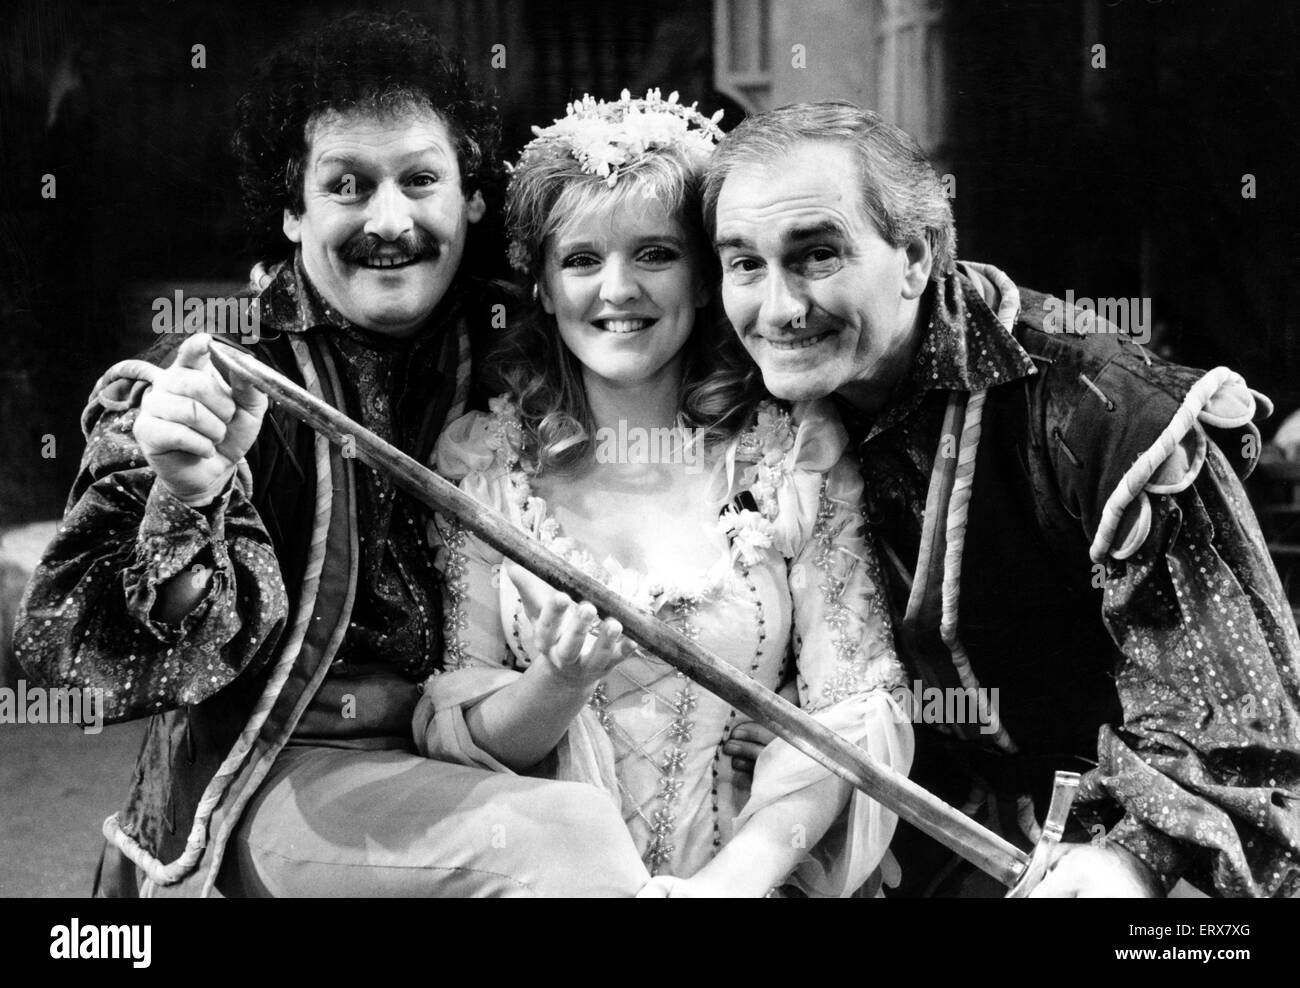 Cannon and Ball star as evil robbers in 'Babes in the Wood' at the Birmingham Hippodrome. The duo are pictured with Bernie Nolan, who plays Maid Marian. 14th December 1989. Stock Photo